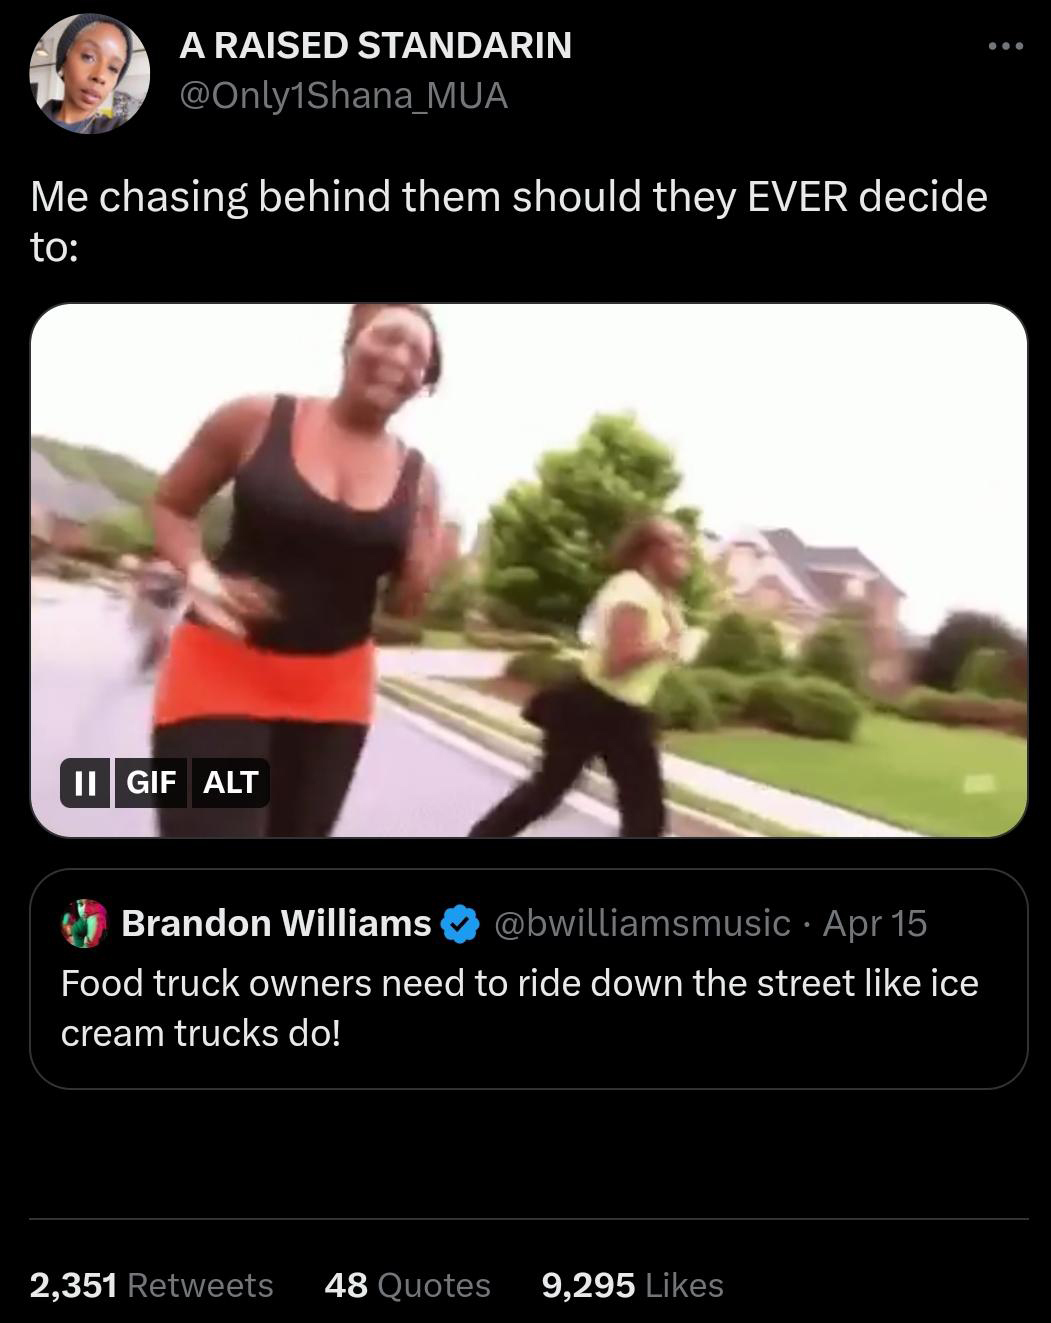 funny tweets and memes - video - A Raised Standarin Me chasing behind them should they Ever decide to Ii Gif Alt Brandon Williams Apr 15 Food truck owners need to ride down the street ice cream trucks do! 2,351 48 Quotes 9,295 ...